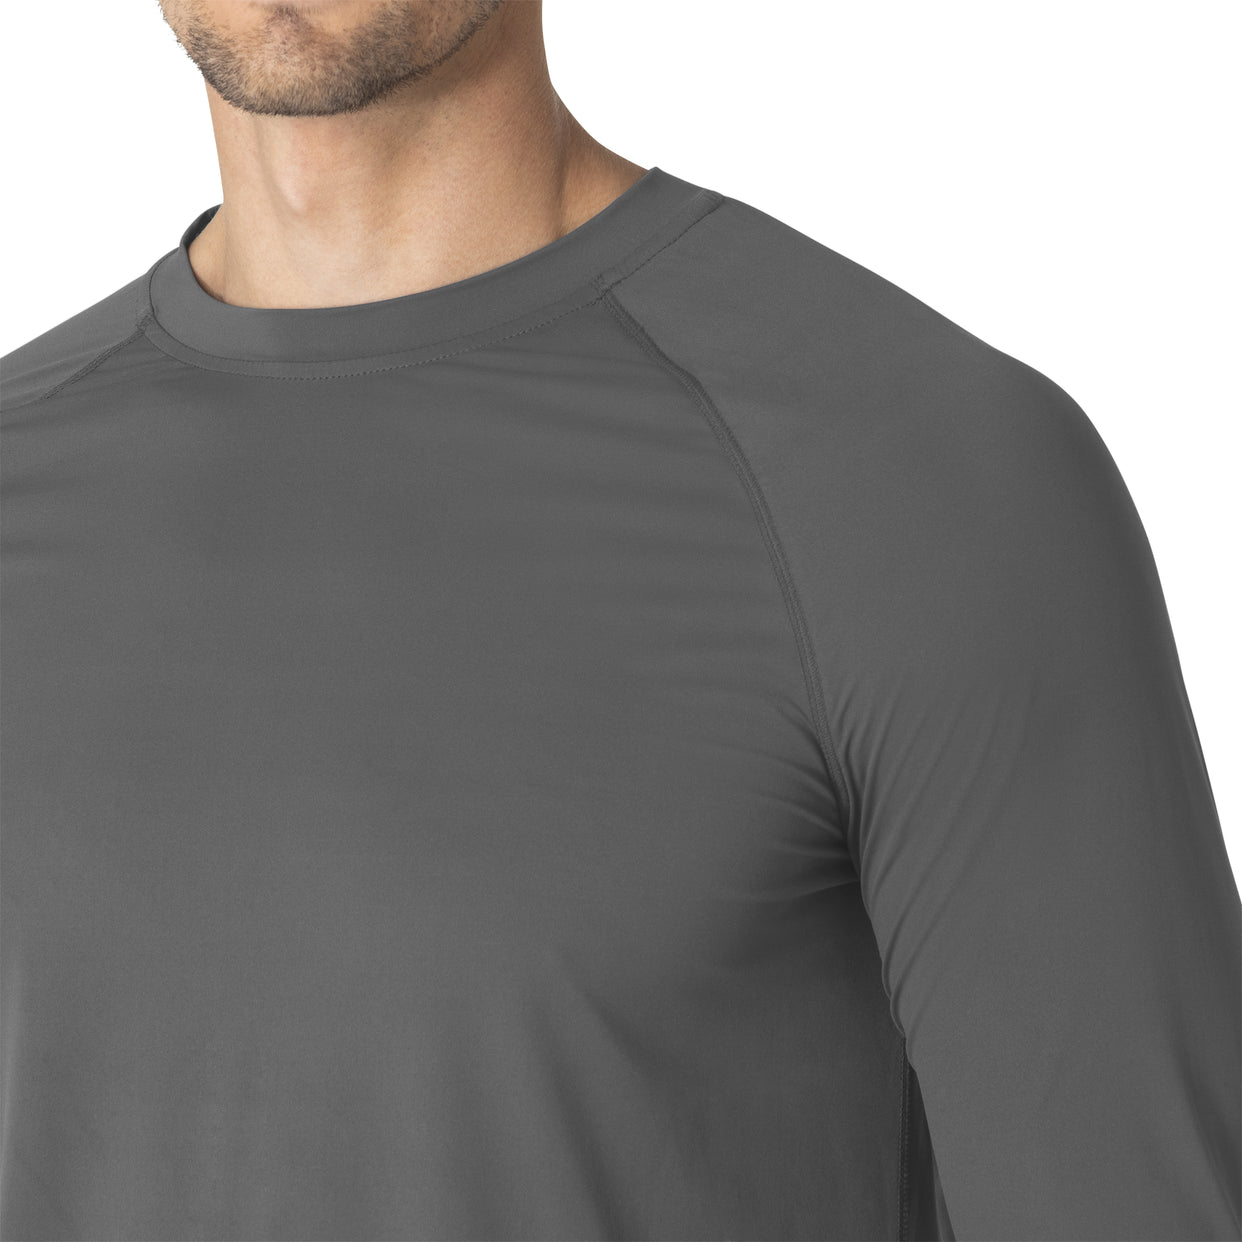 Force Sub-Scrubs Men's Performance Long Sleeve Tee Pewter front detail